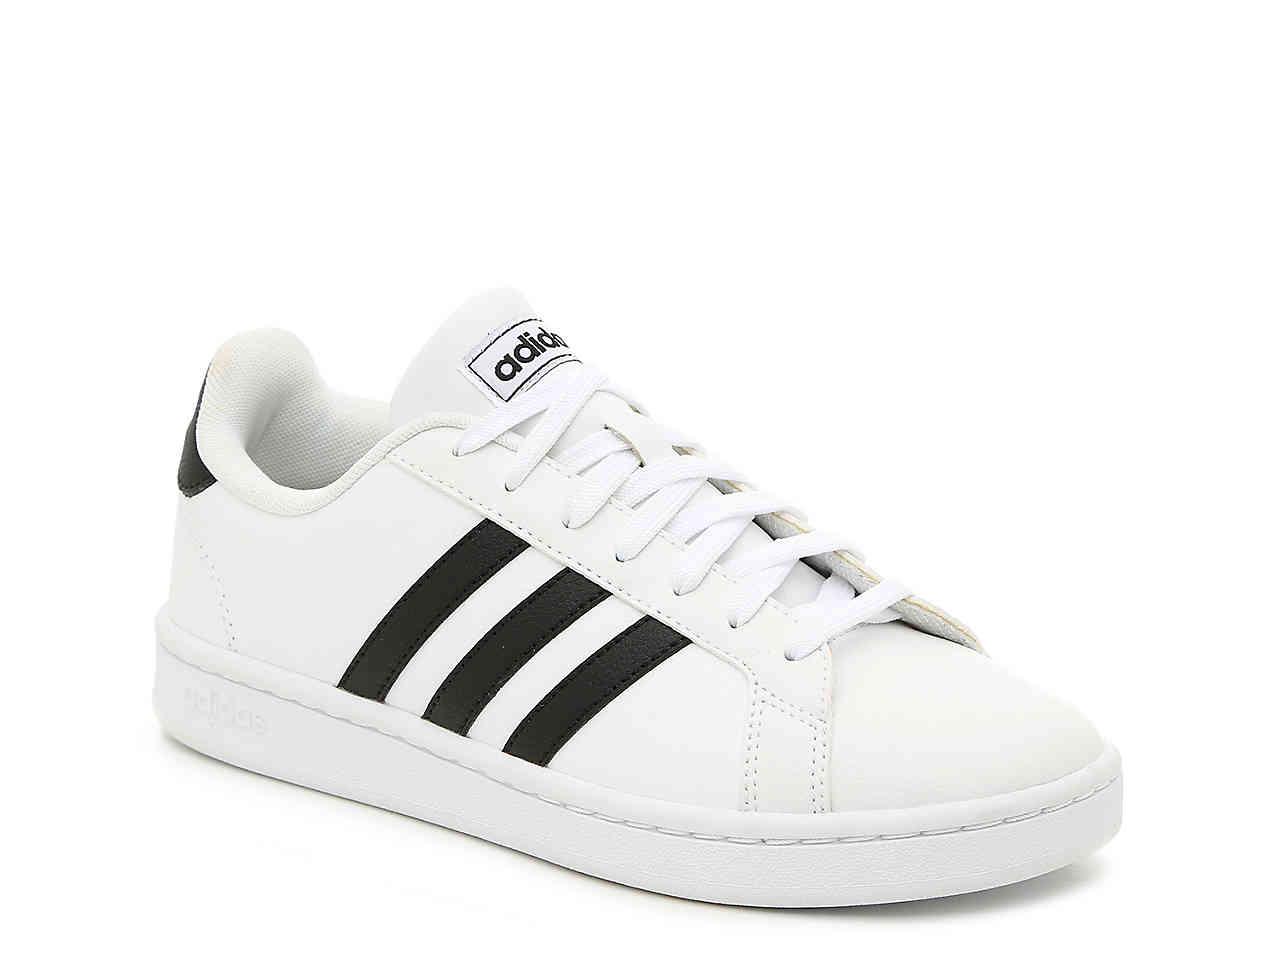 adidas Leather Grand Court Sneaker in White/Black (White) - Lyst